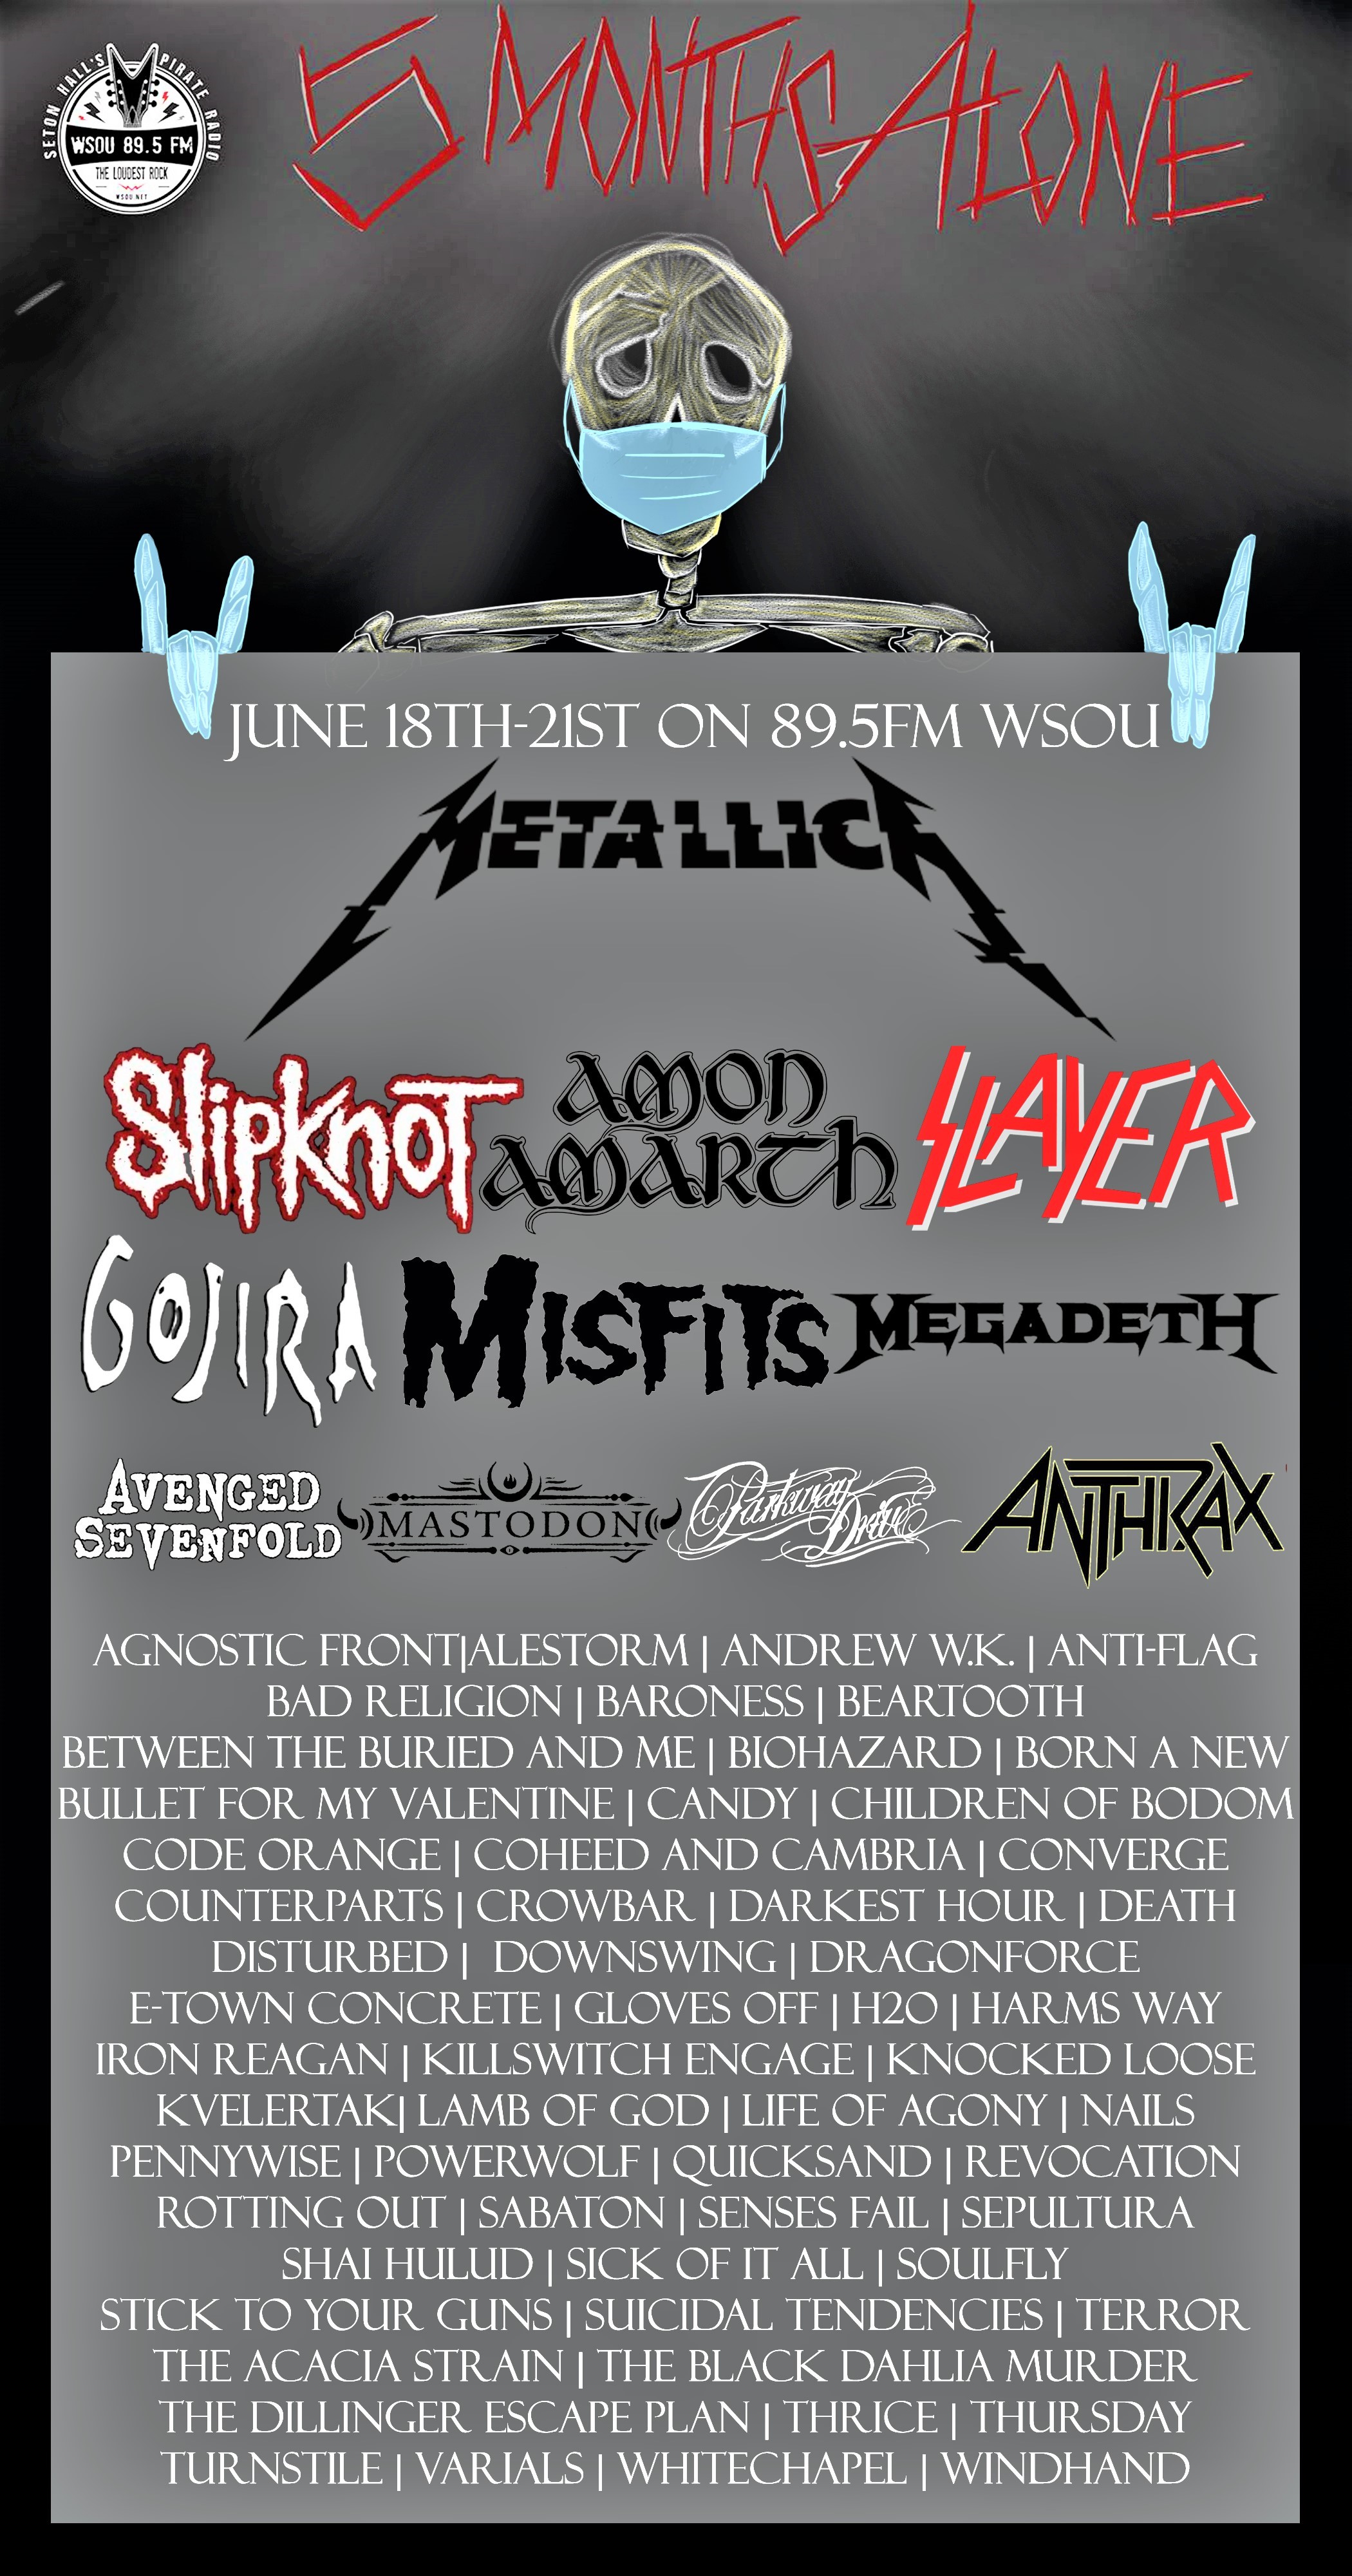 FIVE MONTHS ALONE JUNE18TH-21ST ON 89.5 FM WSOU Metallica, Slipknot, Amon Amarth, Slayer, Gojira, Misfits, Megadeth, Avenged Sevenfold, Mastodon, Parkway Drive, Anthrax, Agnostic Front, Alestorm, Andrew W.K., Anti-Flag, Baroness, Beartooth, and more!